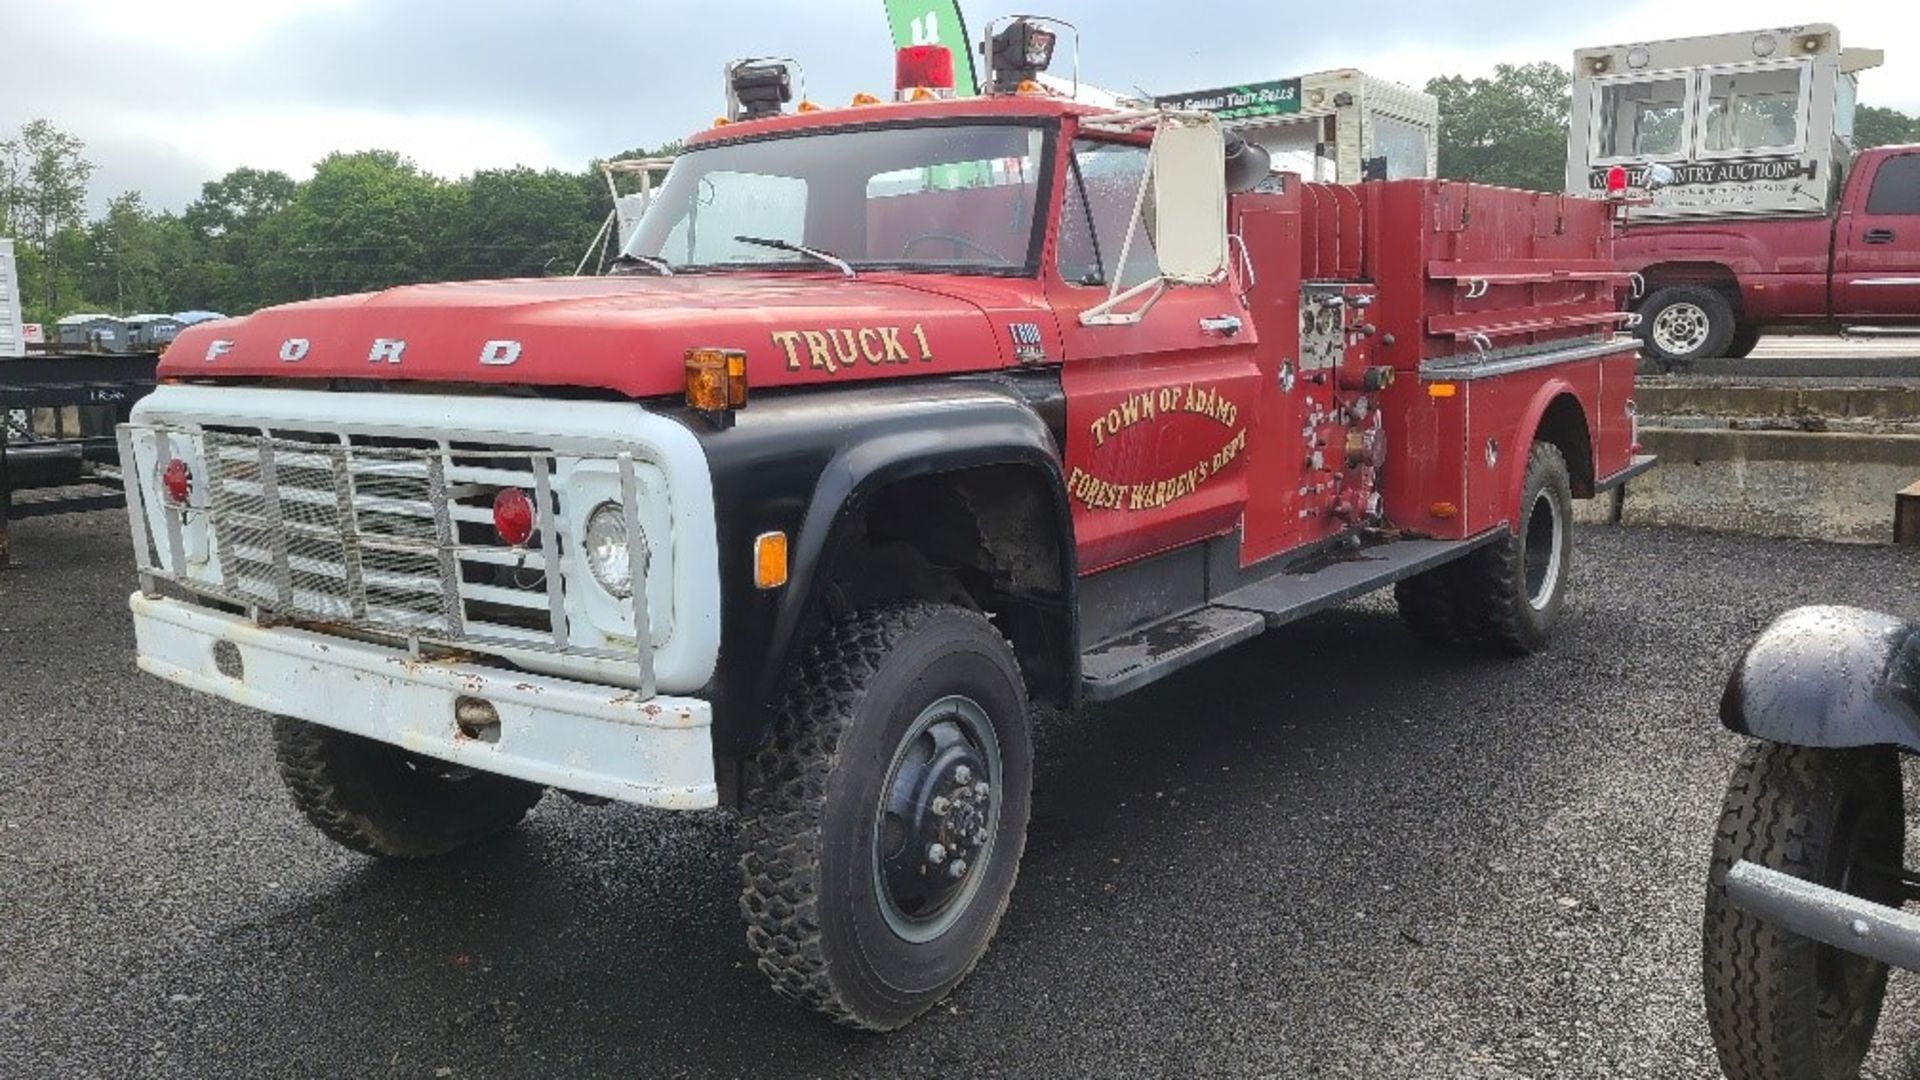 please add info for fire truck - Image 11 of 11